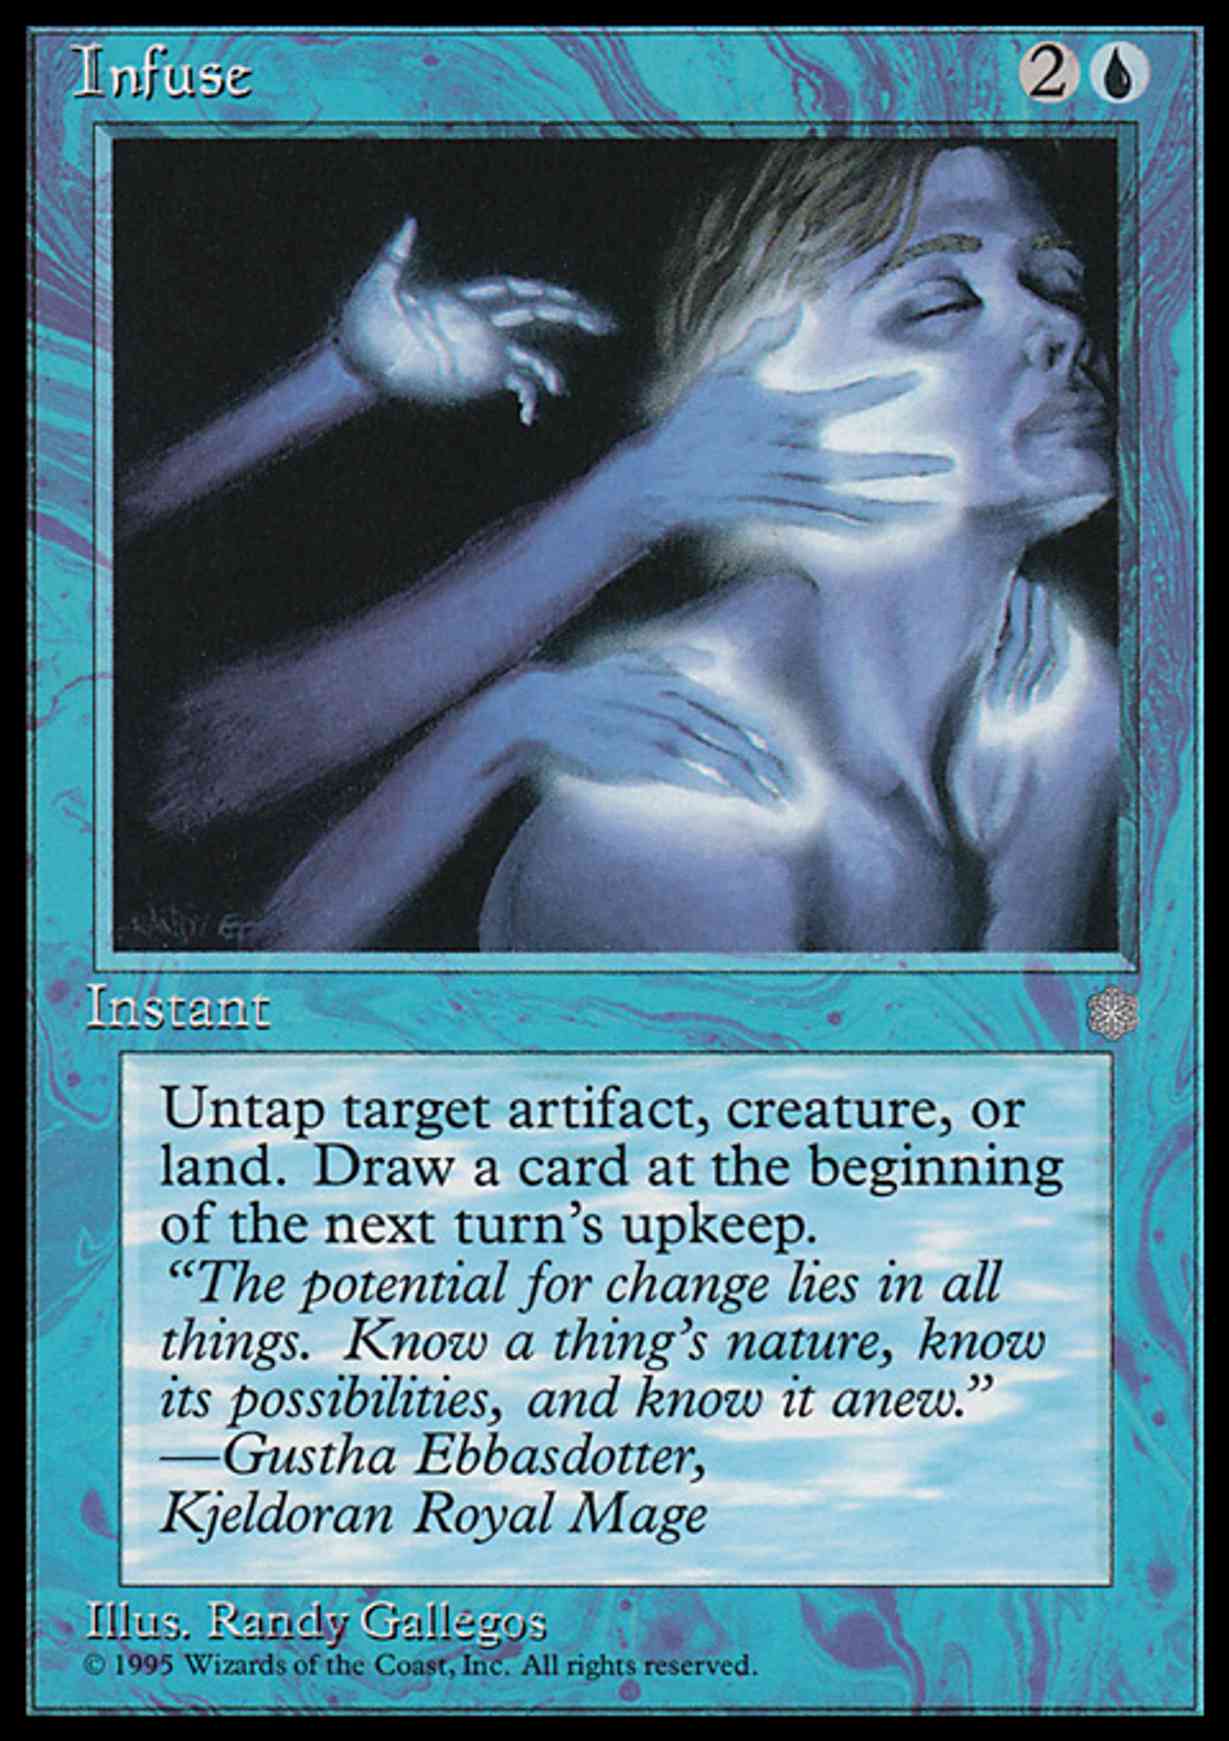 Infuse magic card front